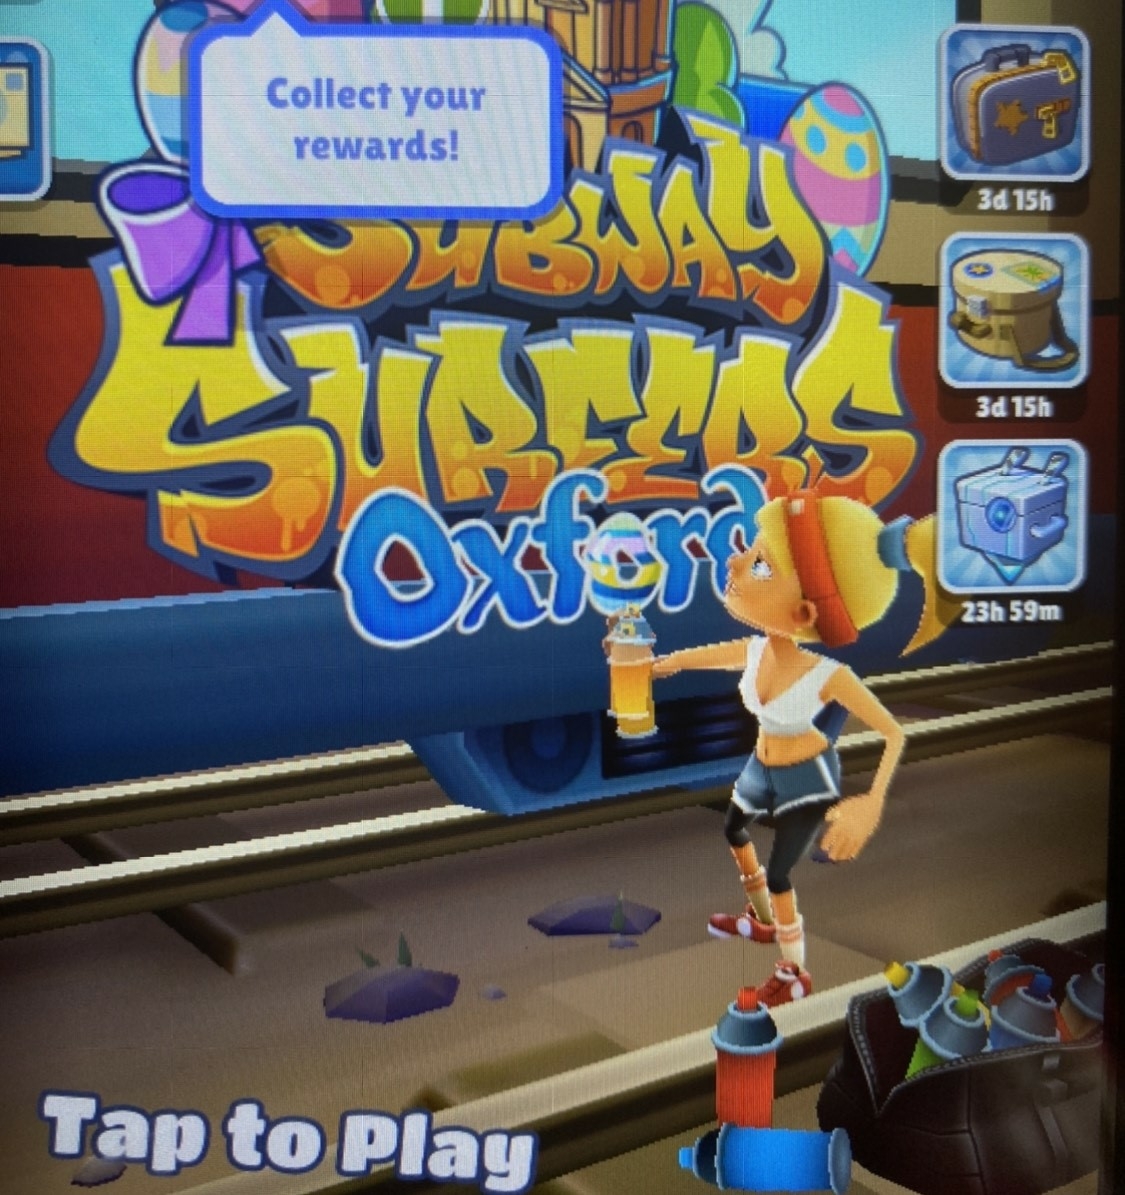 playing subway surfers until｜TikTok Search